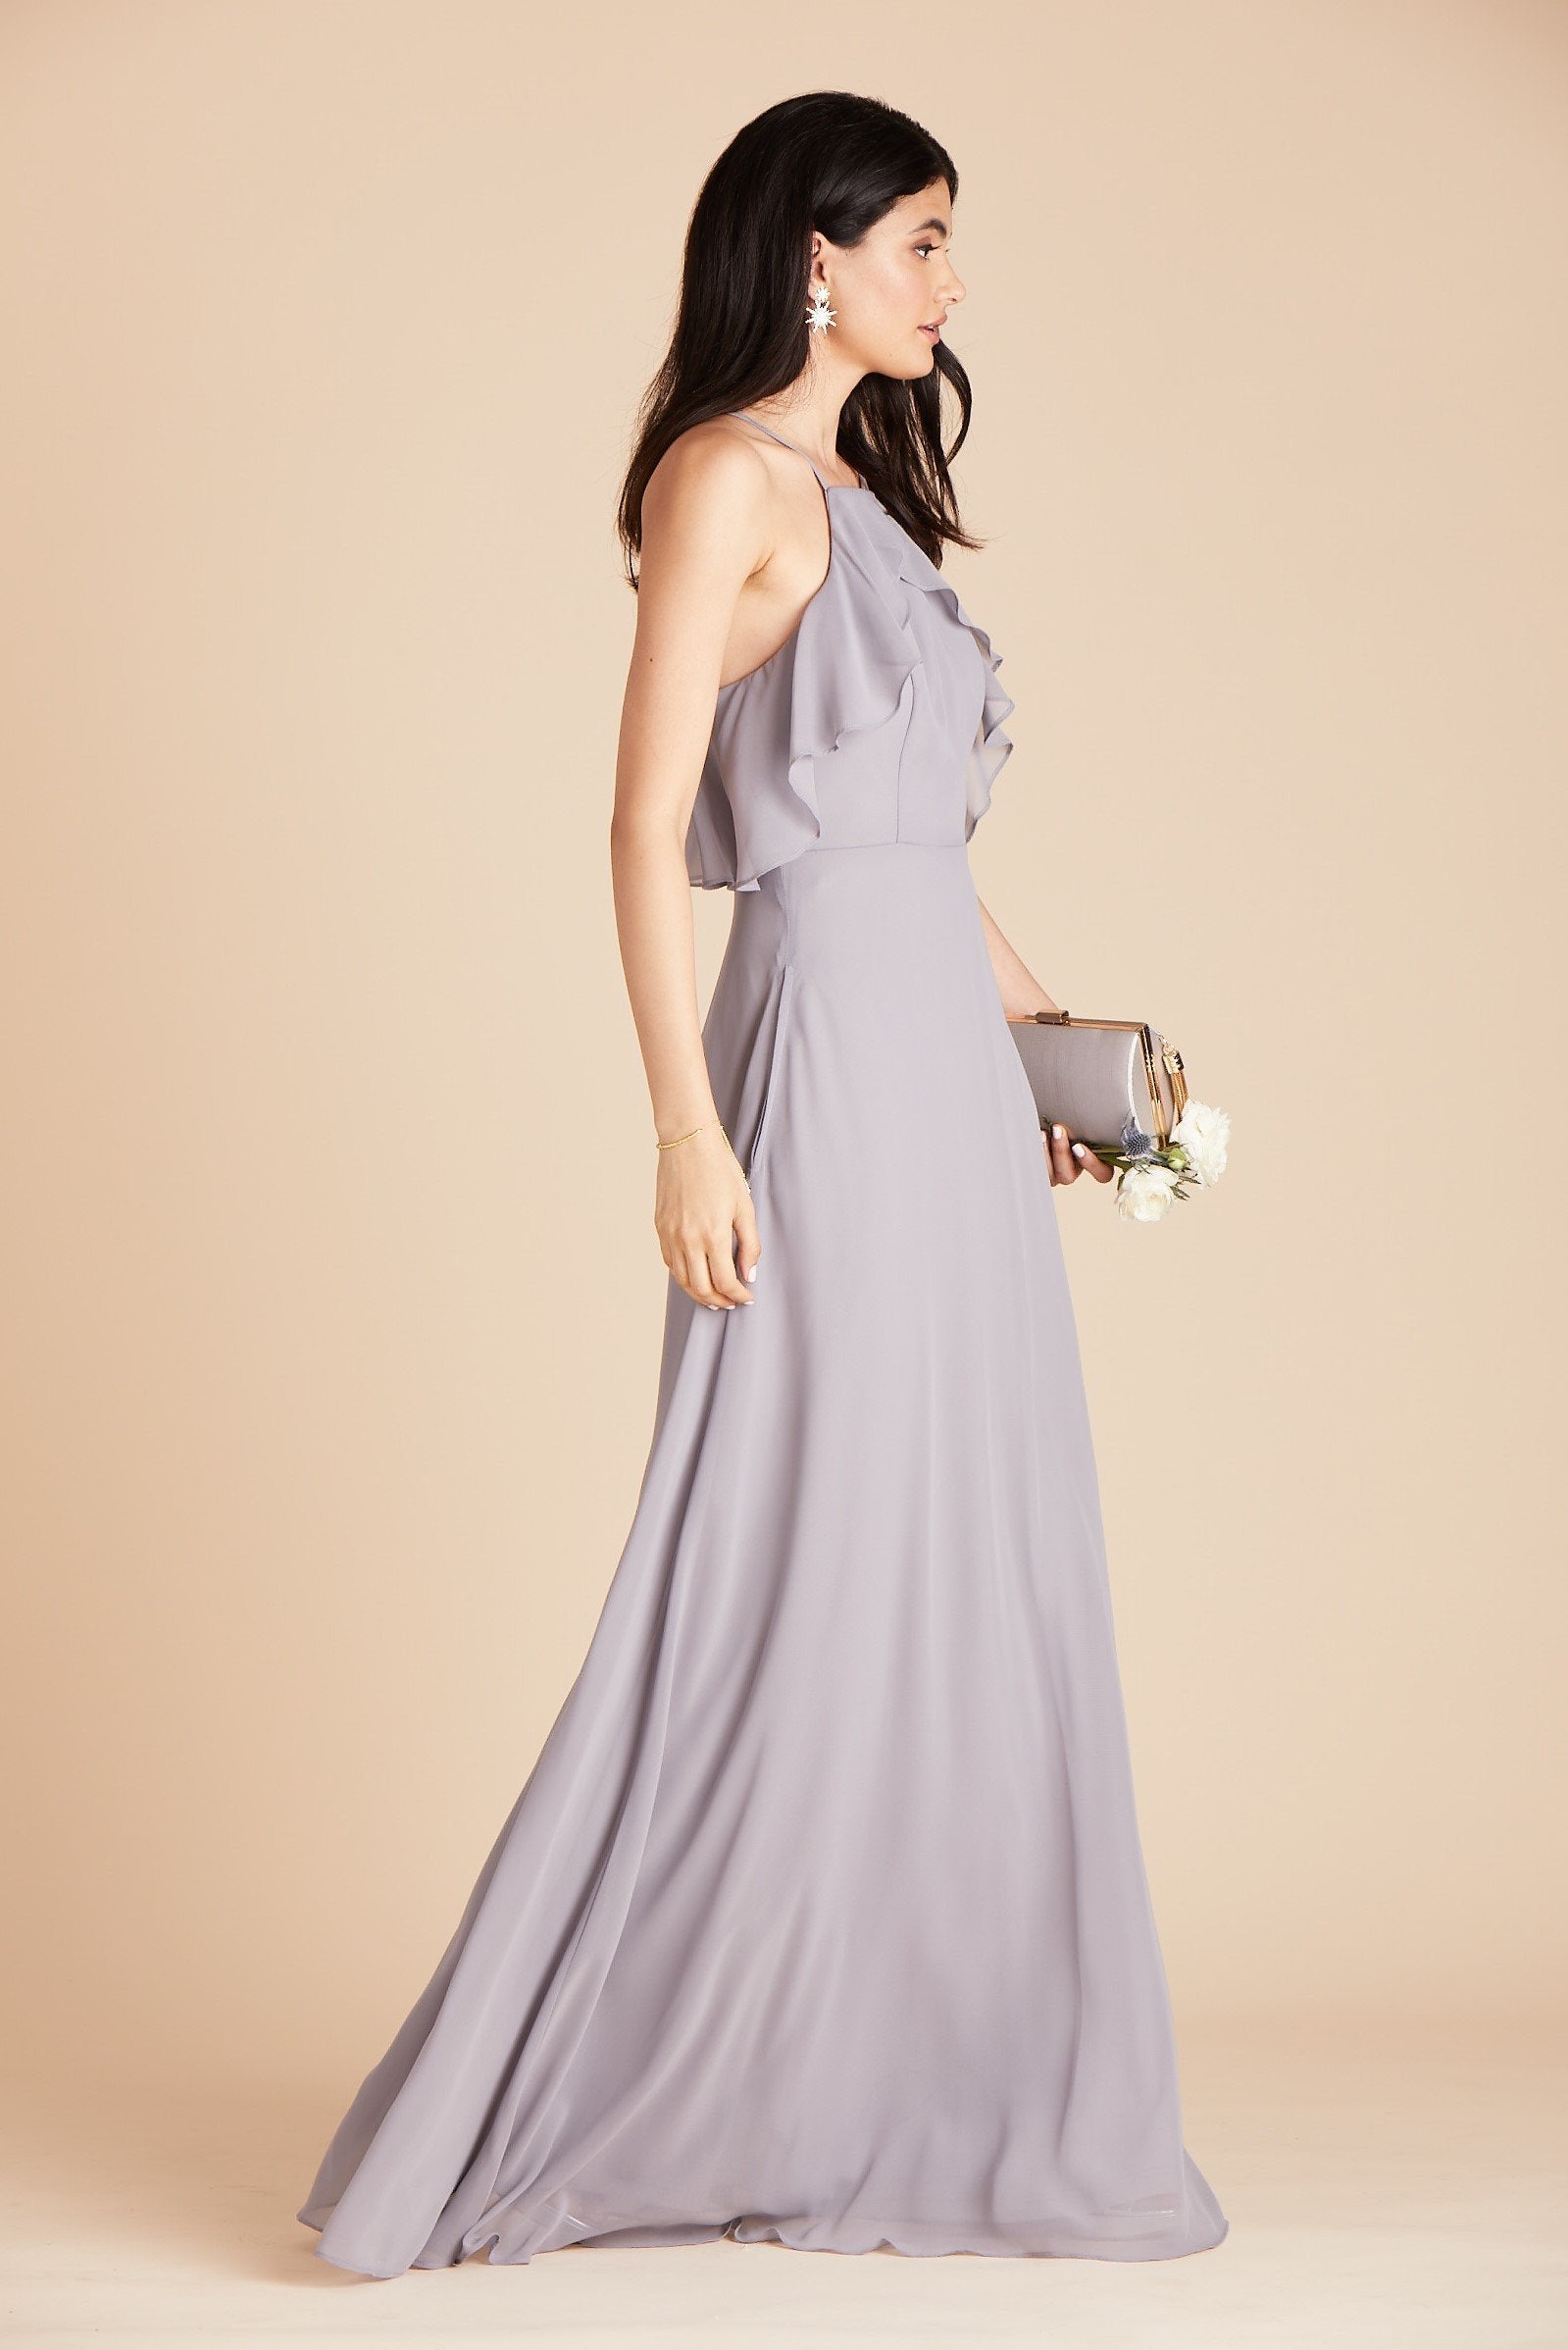 Jules bridesmaid dress in silver chiffon by Birdy Grey, side view